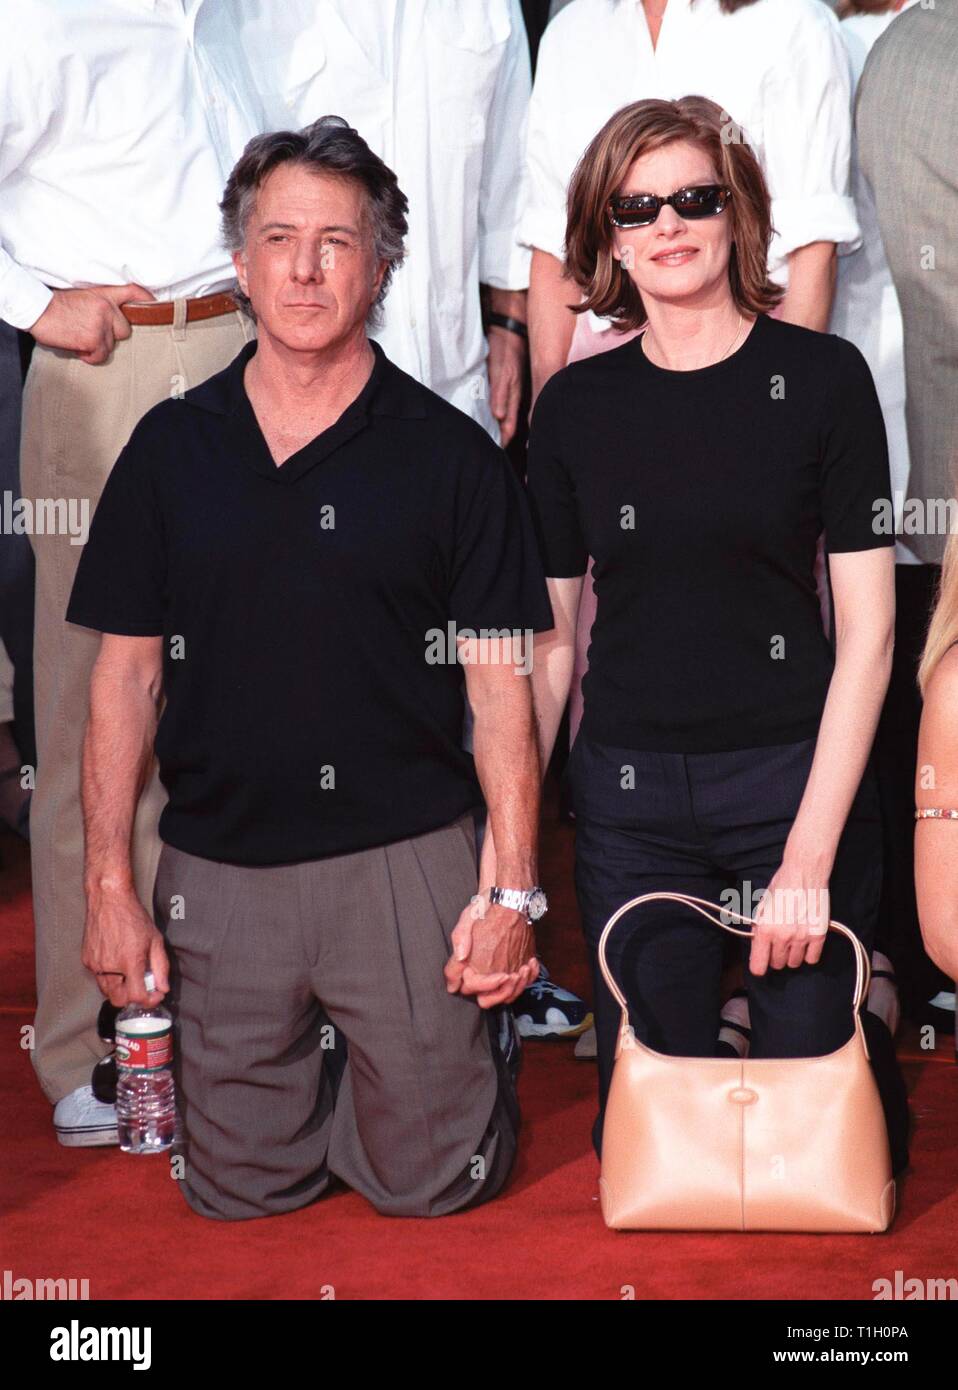 LOS ANGELES, CA. September 30, 1999:   Actors Dustin Hoffman & Rene Russo at Mann's Chinese Theatre in Hollywood where Warner Bros. chairmen & co-CEOs Robert A. Daly & Terry Semel had their hand & footprints set in cement.      © Paul Smith / Featureflash Stock Photo